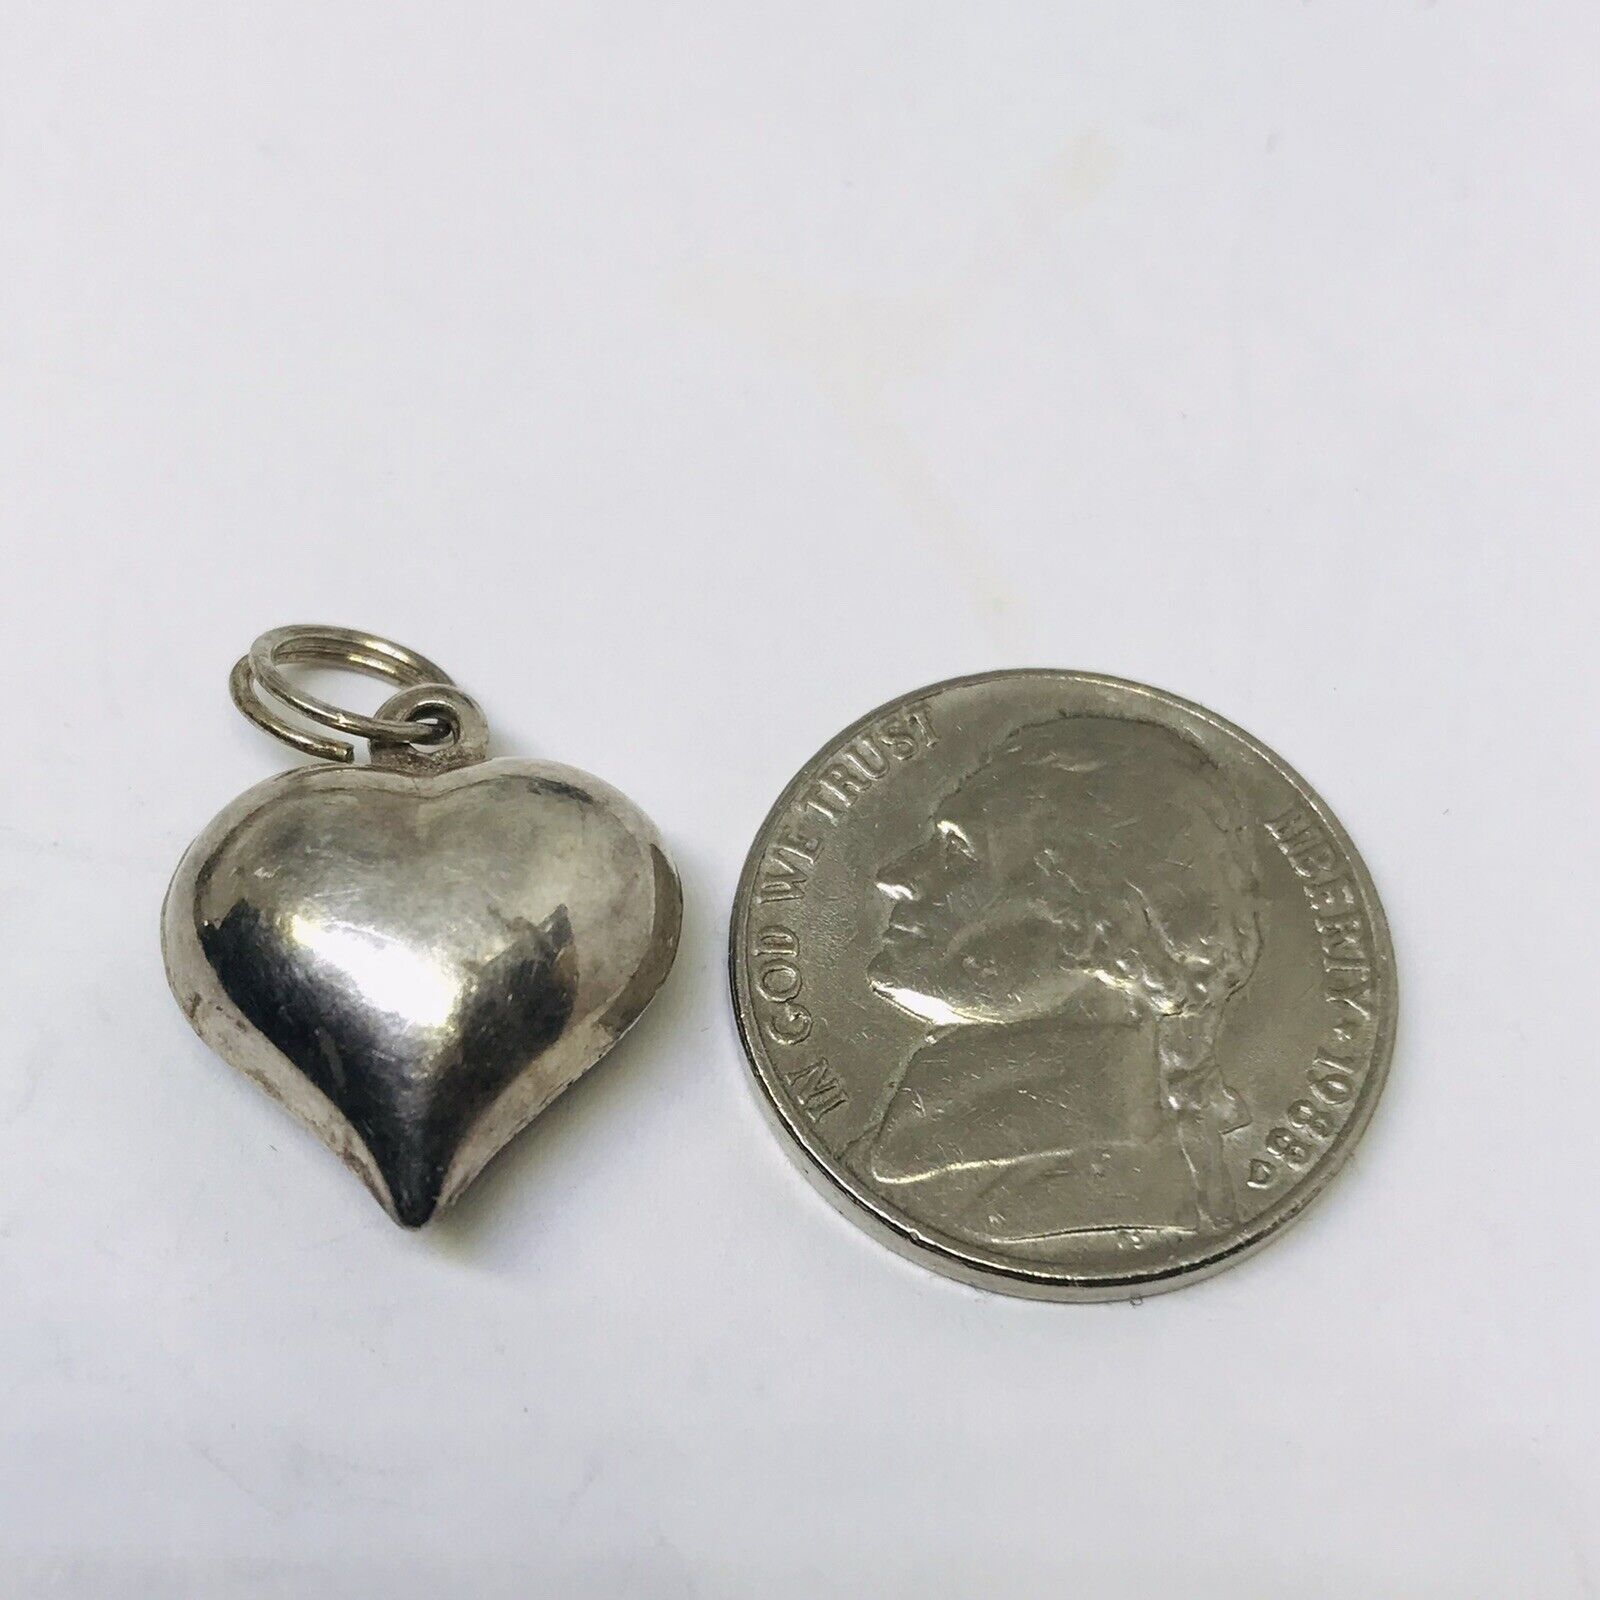 2g 925 STERLING SILVER PUFFY HEART CHARM ANTIQUE JEWELRY LOVE FINE